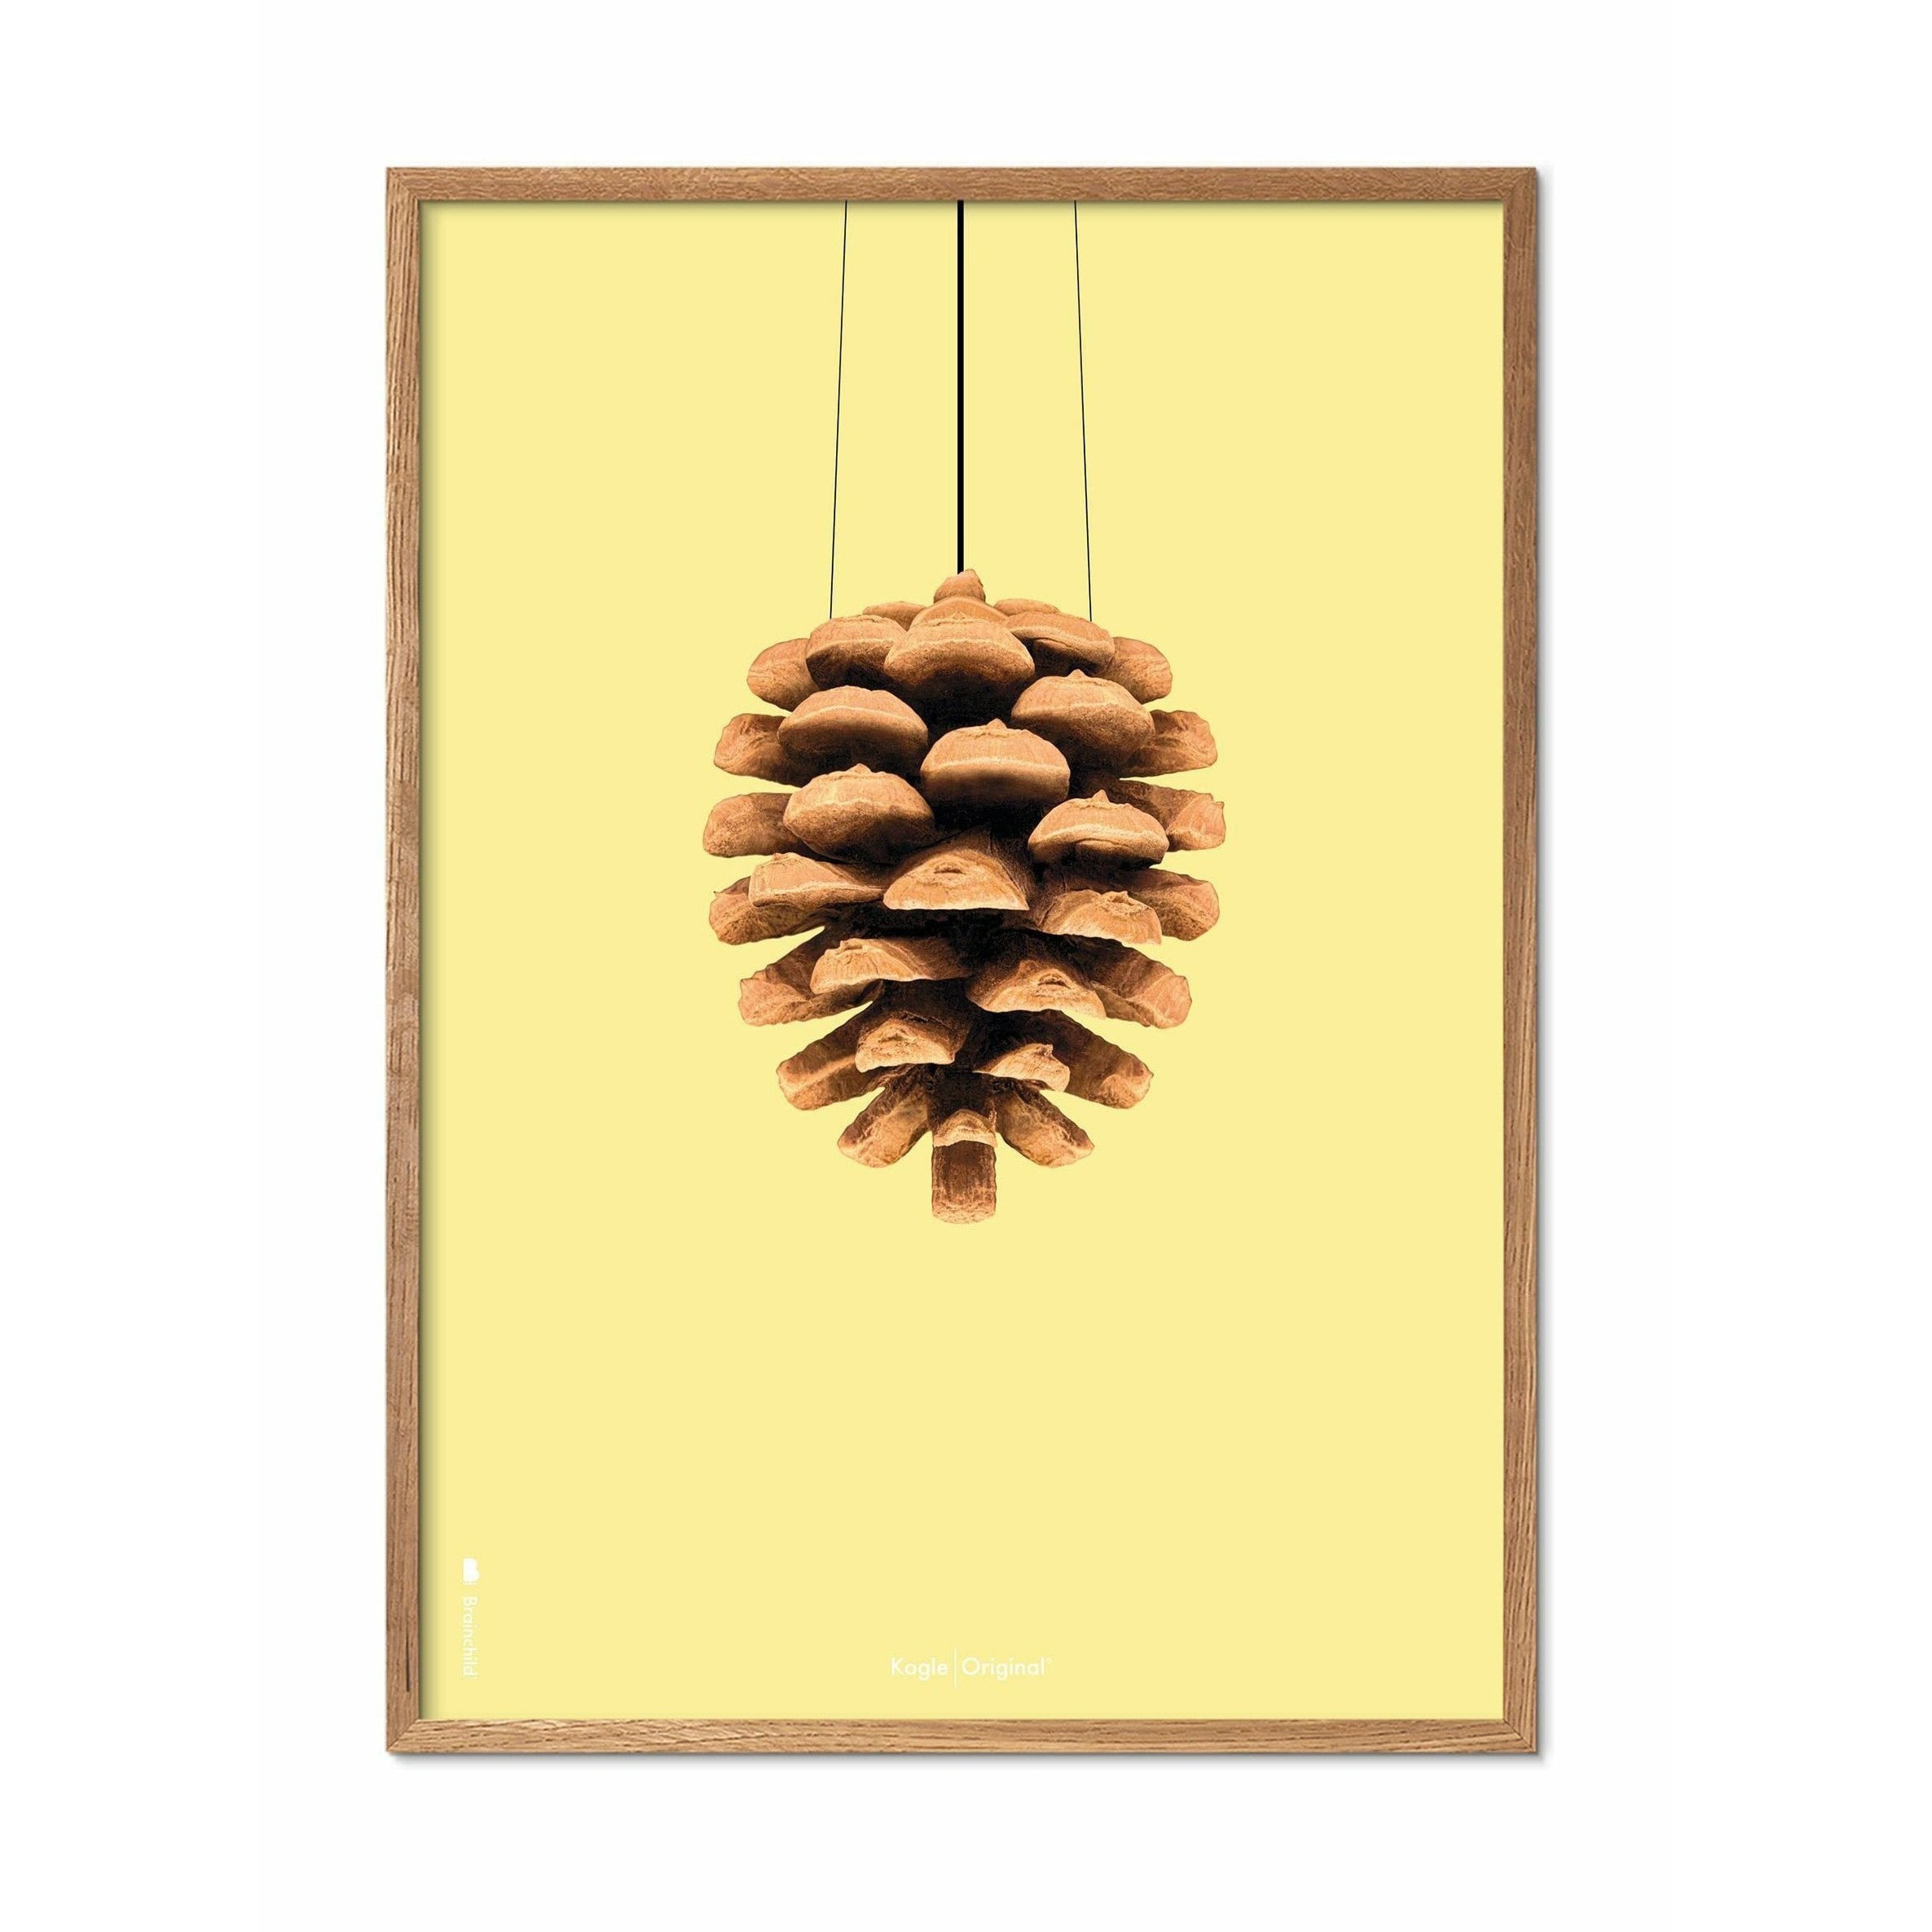 Brainchild Pine Cone Classic Poster, Frame Made Of Light Wood 70x100 Cm, Yellow Background